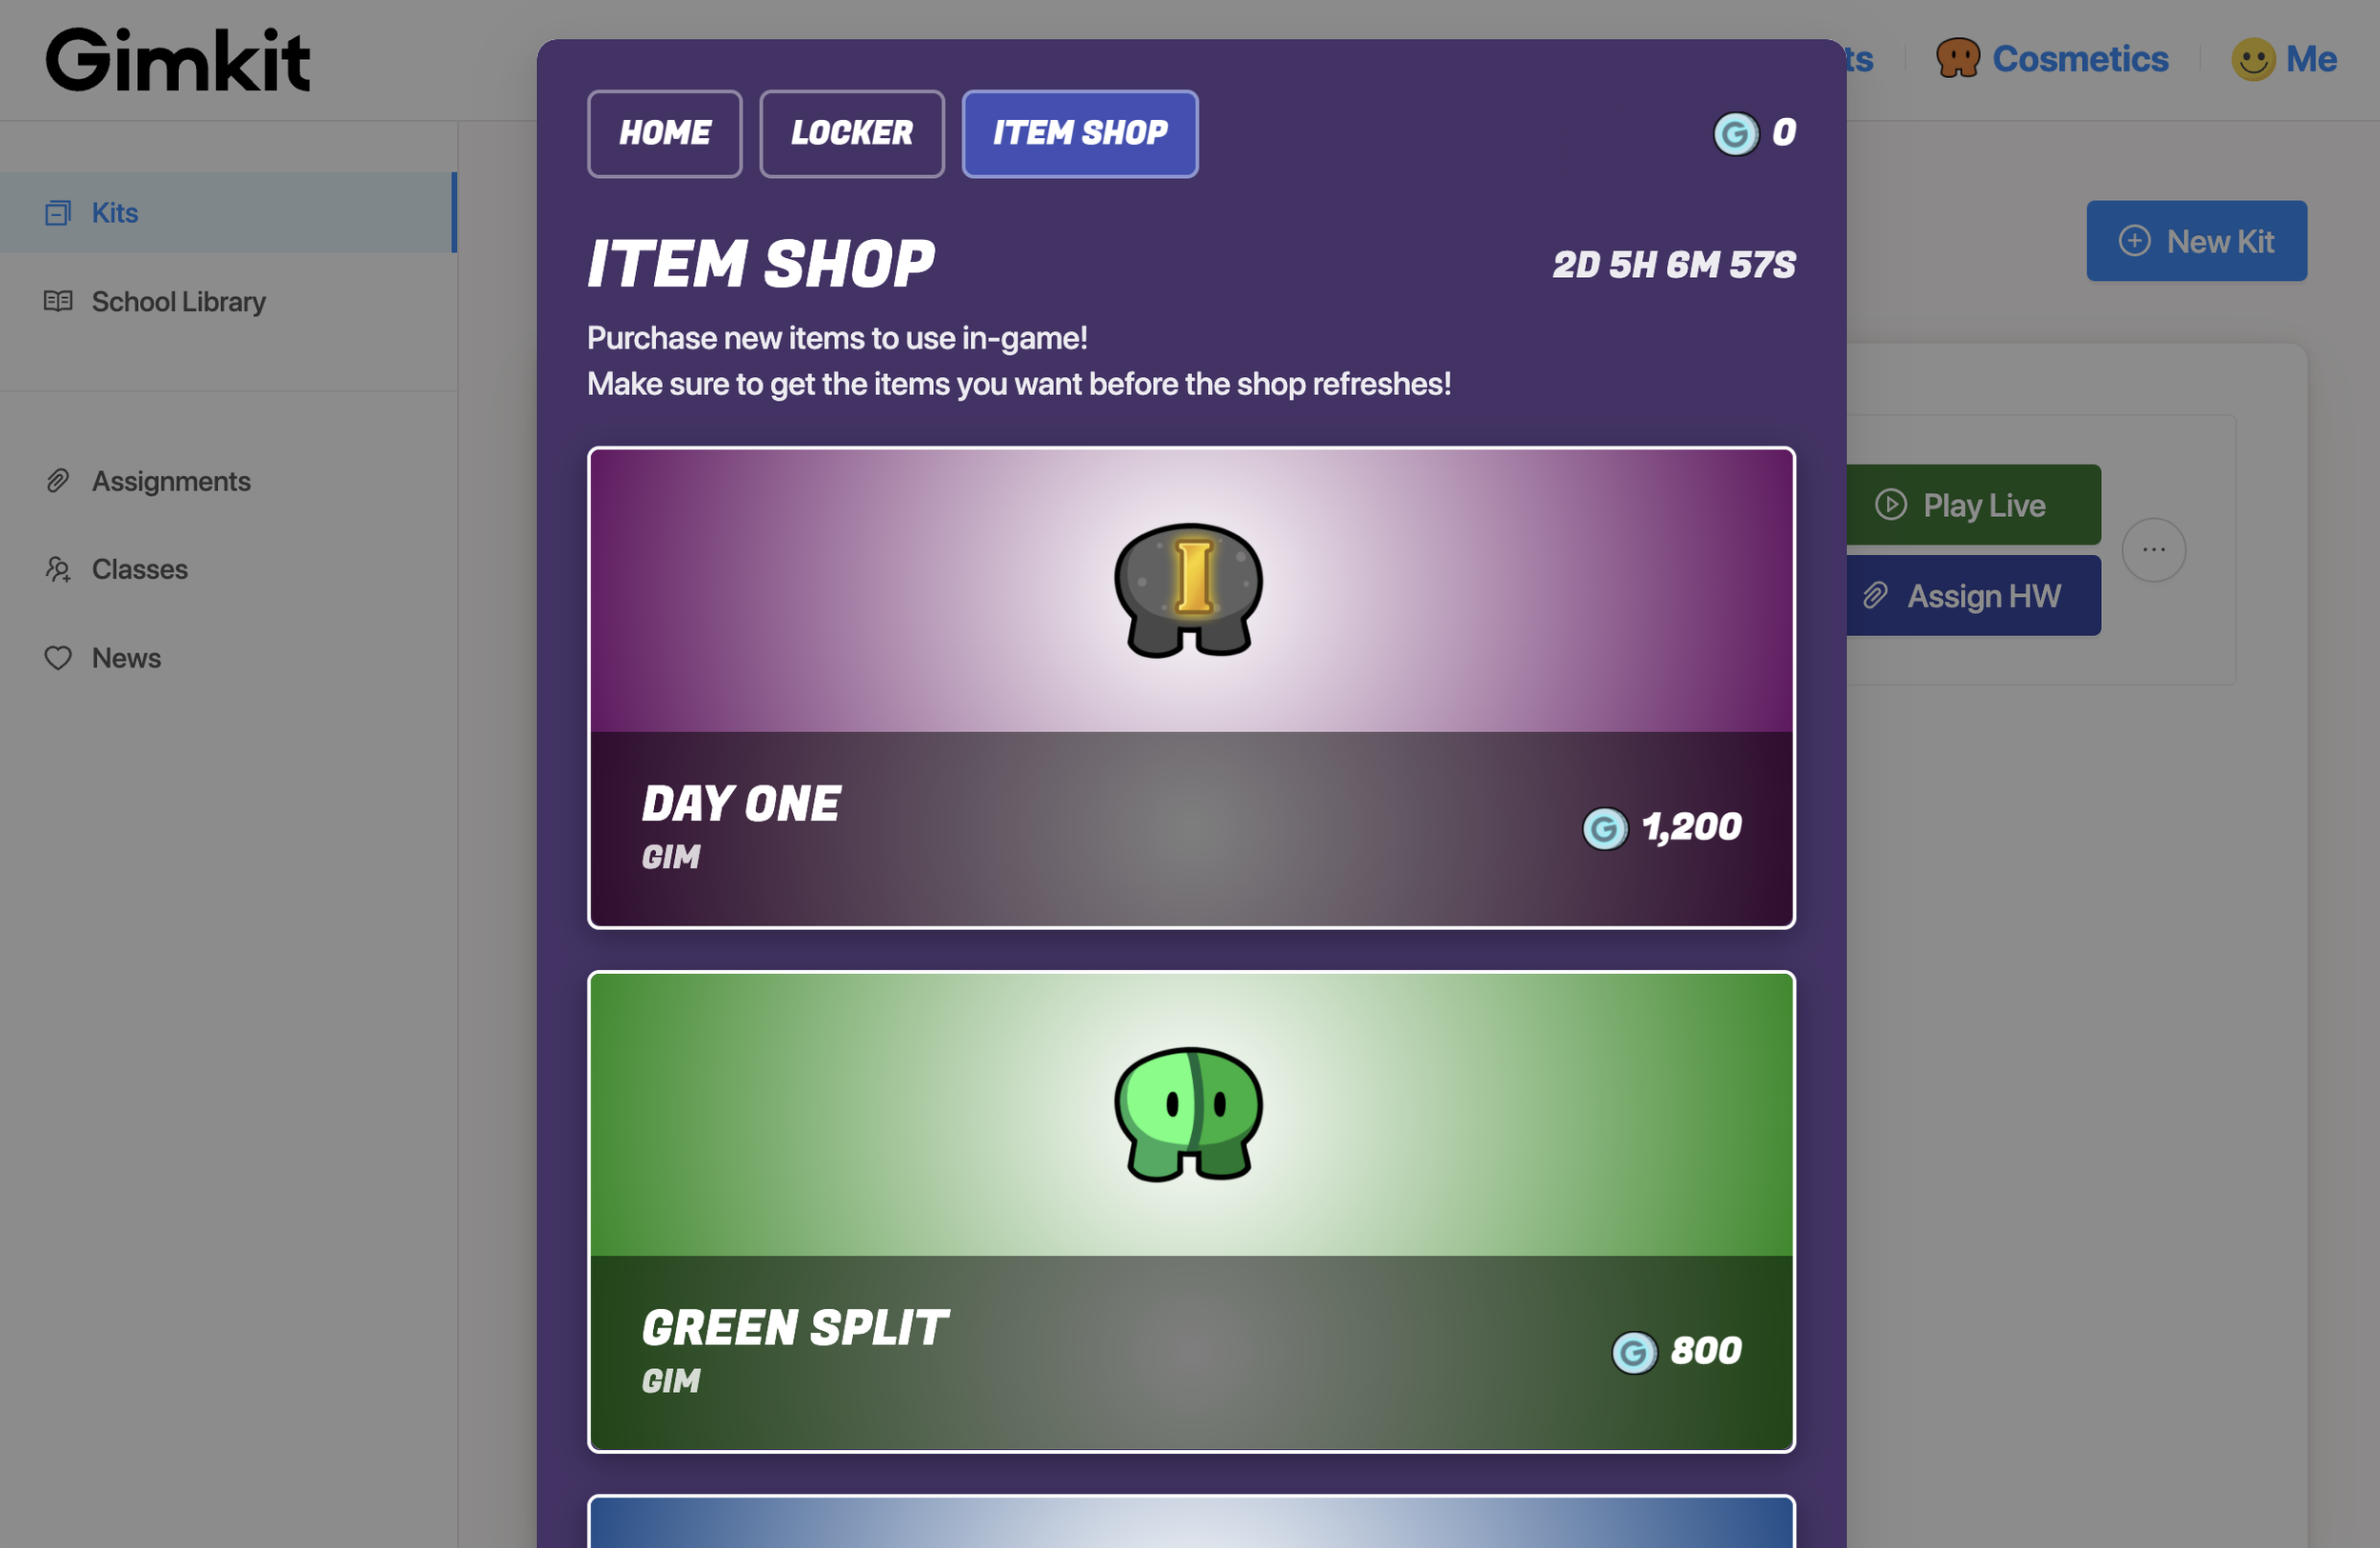 Introducing Our In-Game Store - News